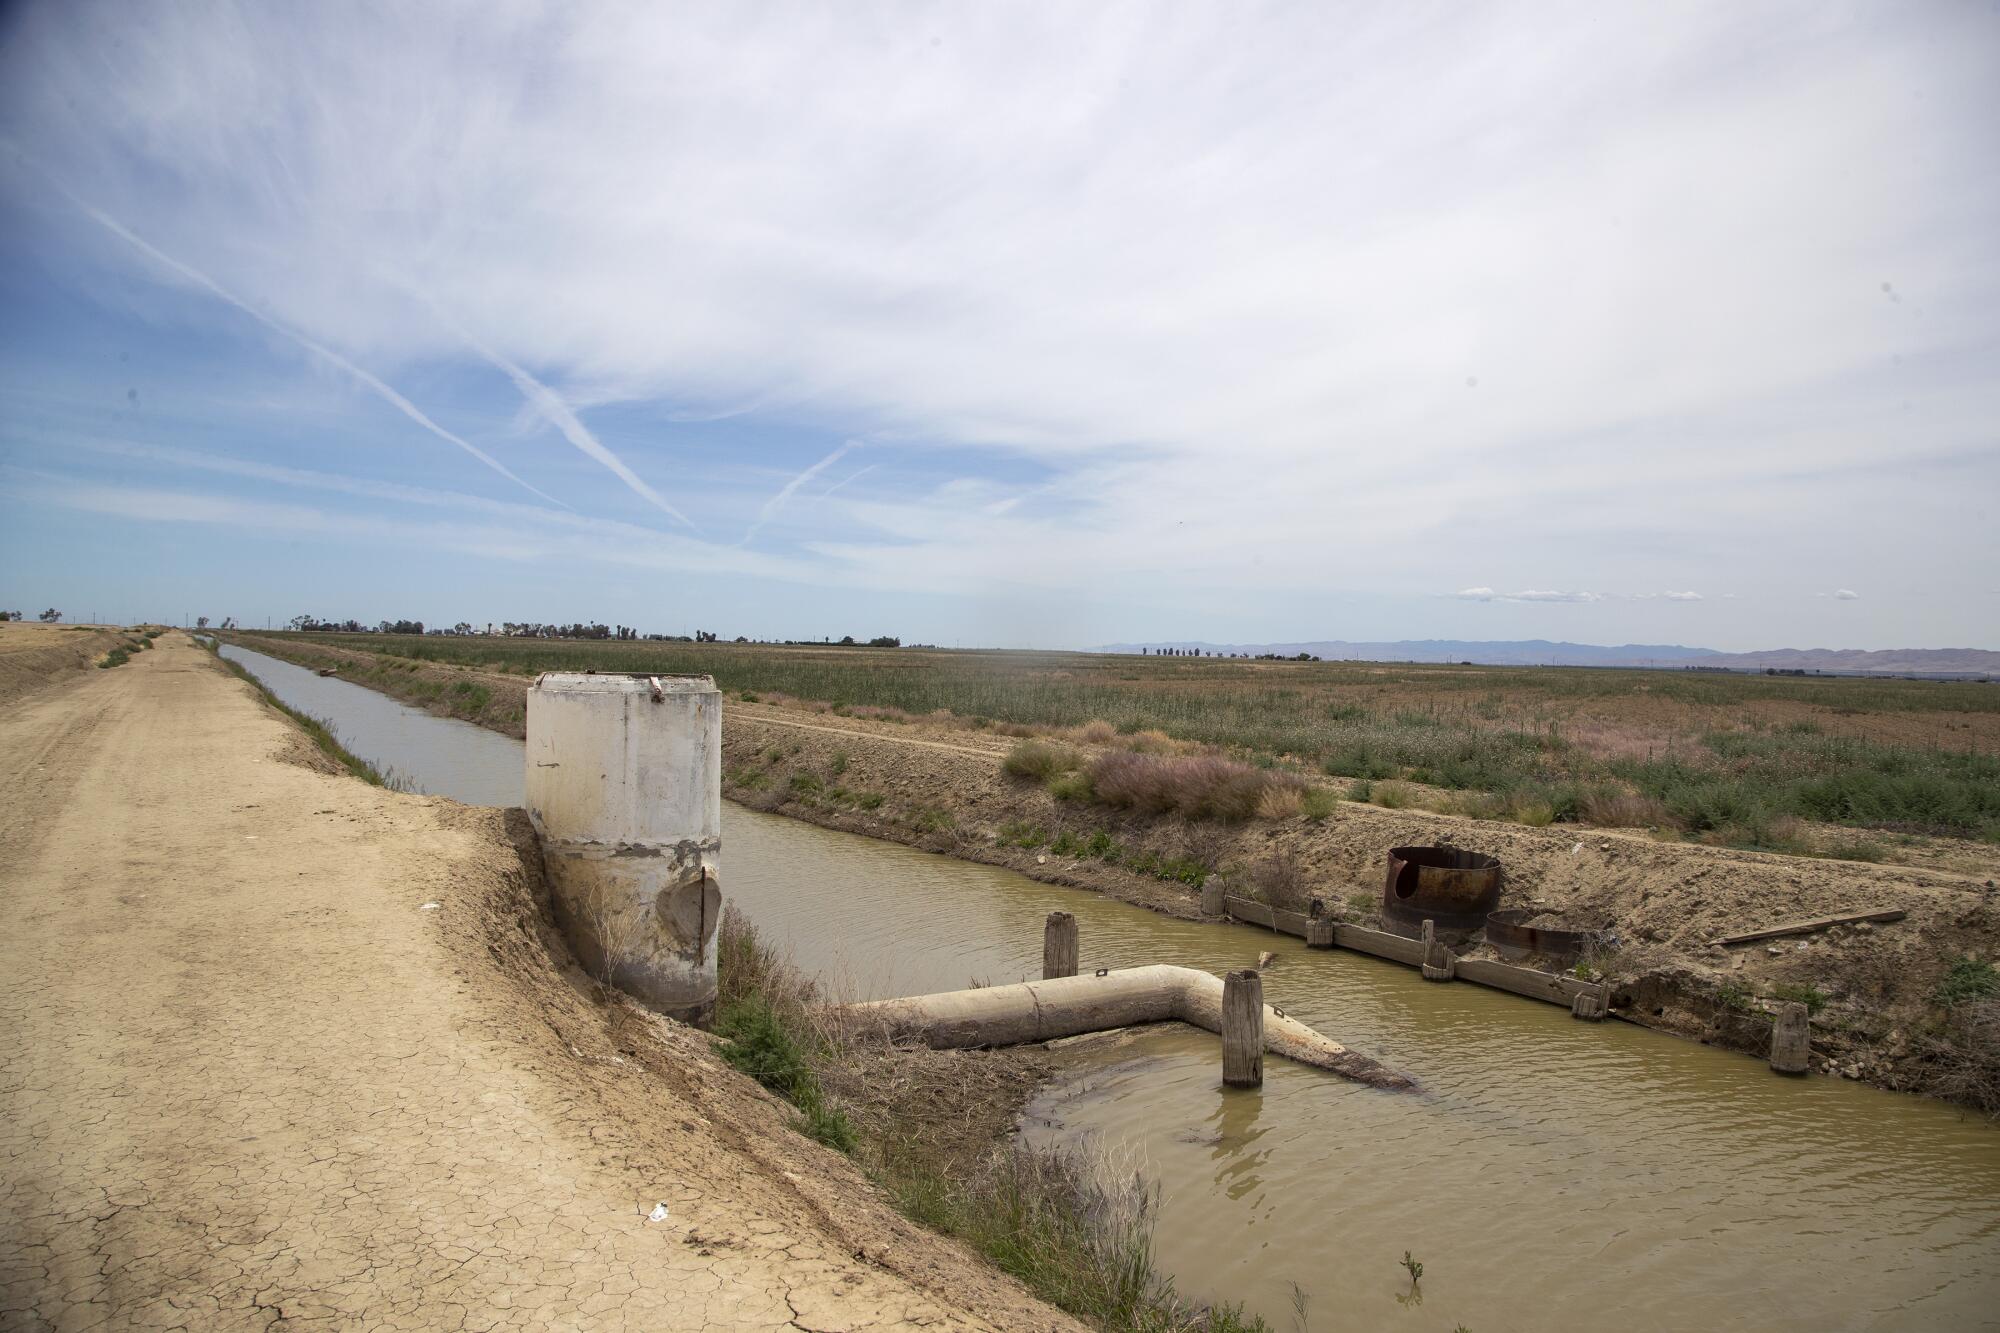 A large irrigation pipe extends into a canal.